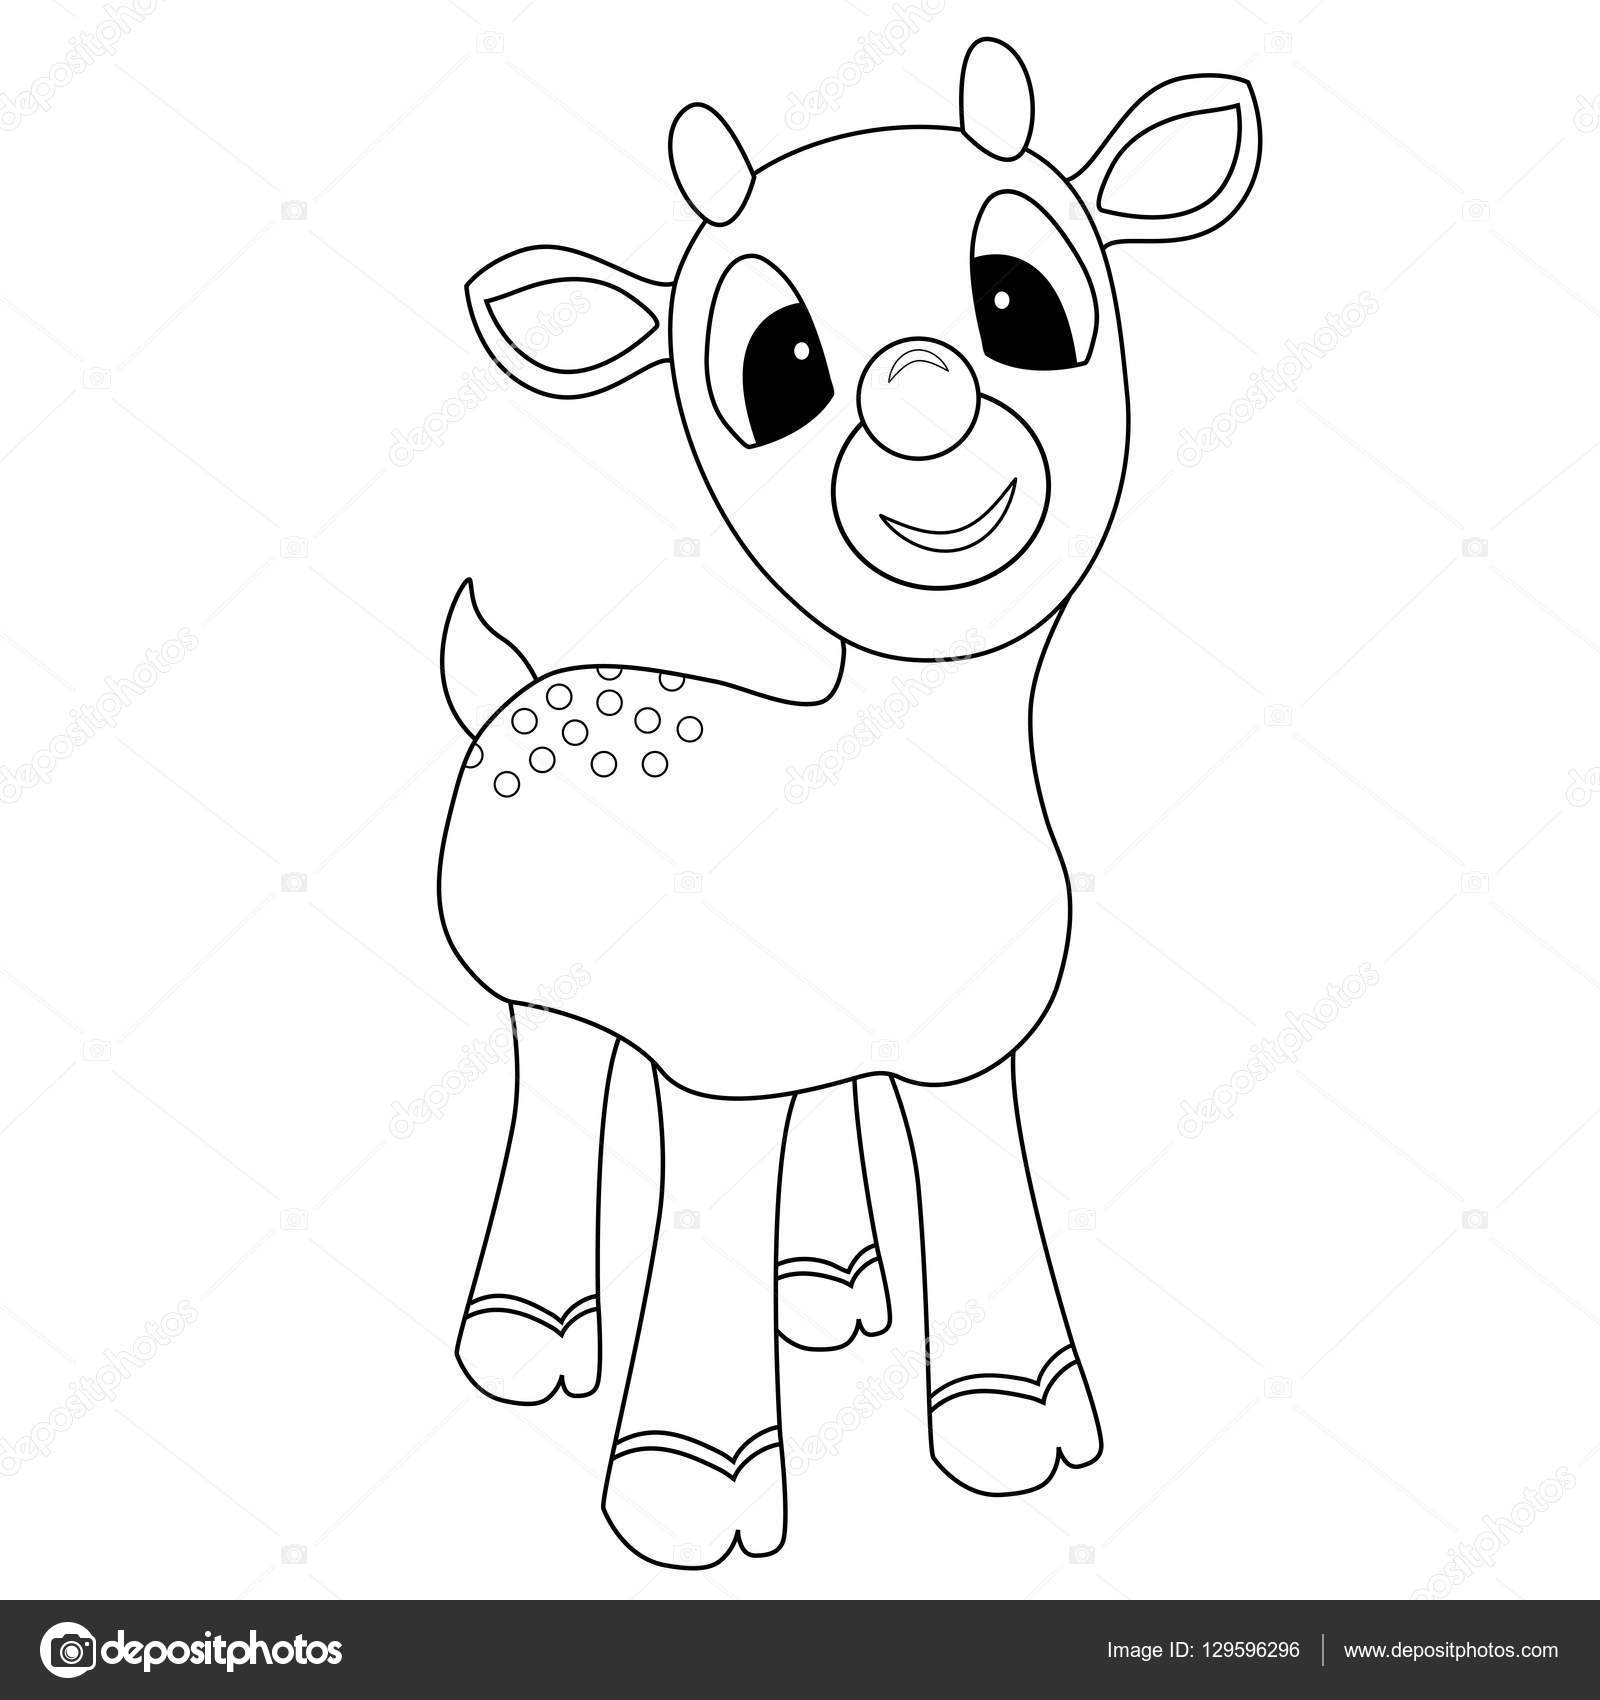 Rudolph coloring page stock illustration by smk